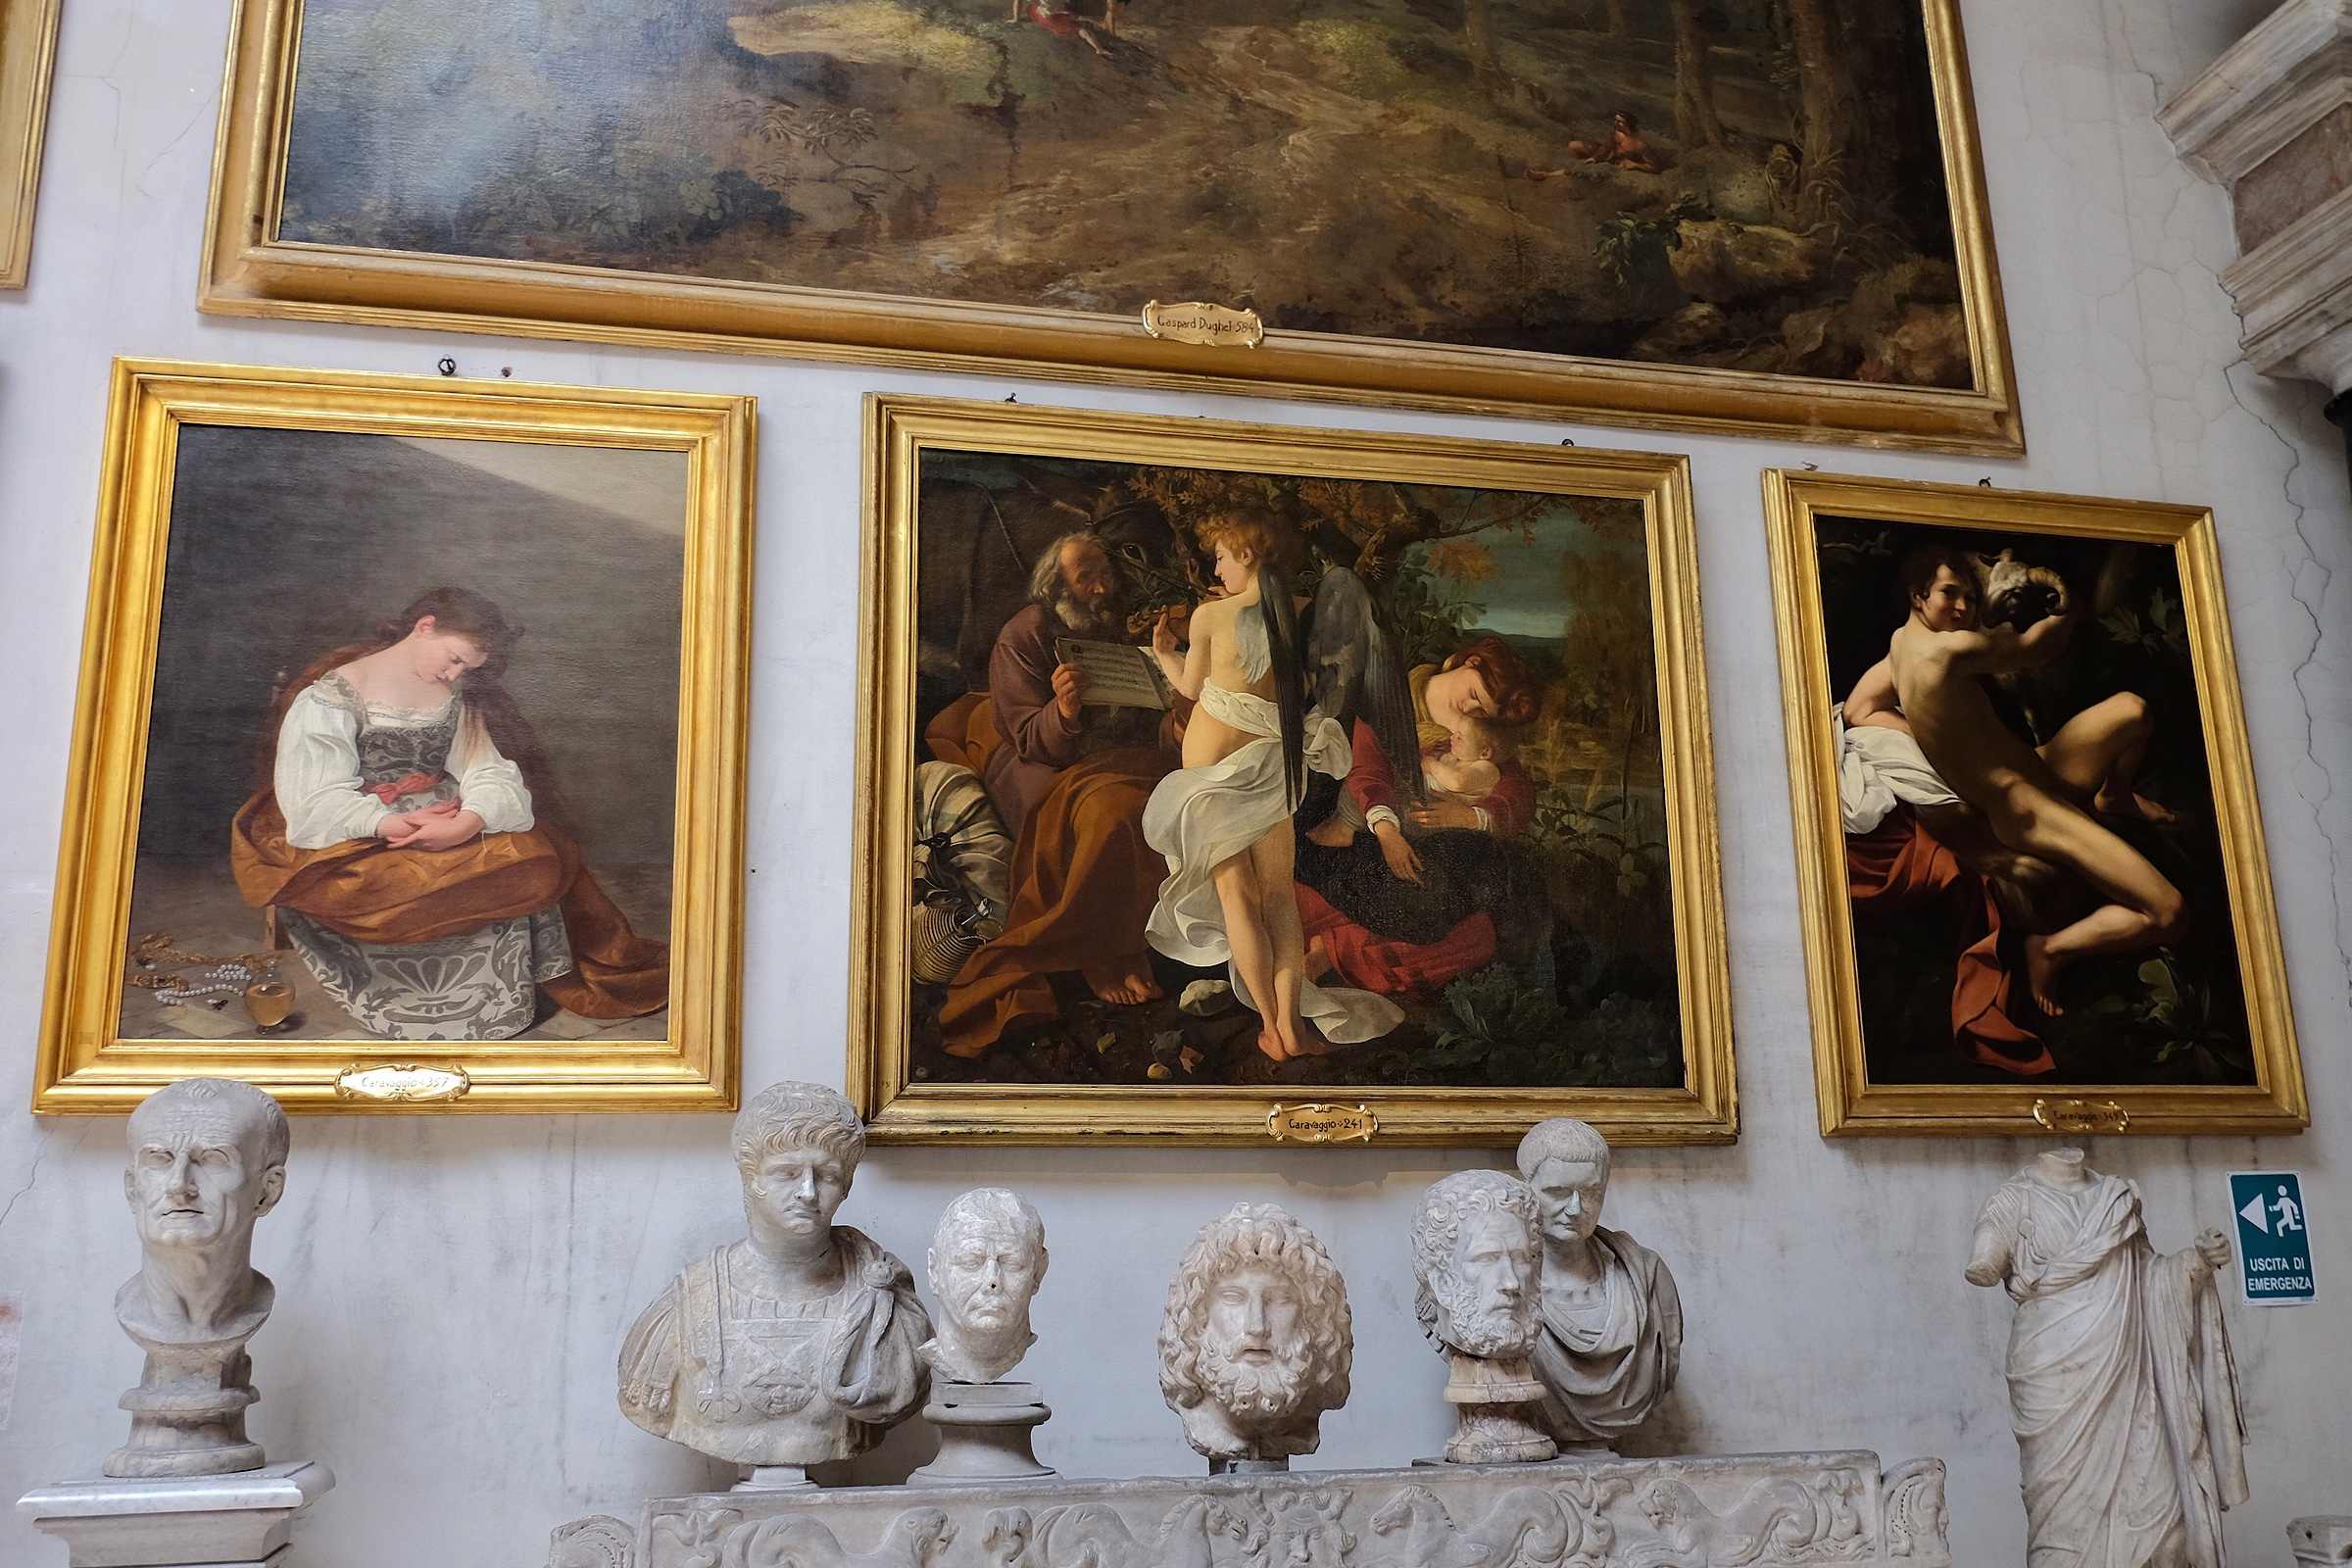 Three incredible Caravaggio paintings in the Doria Pamphili Gallery.